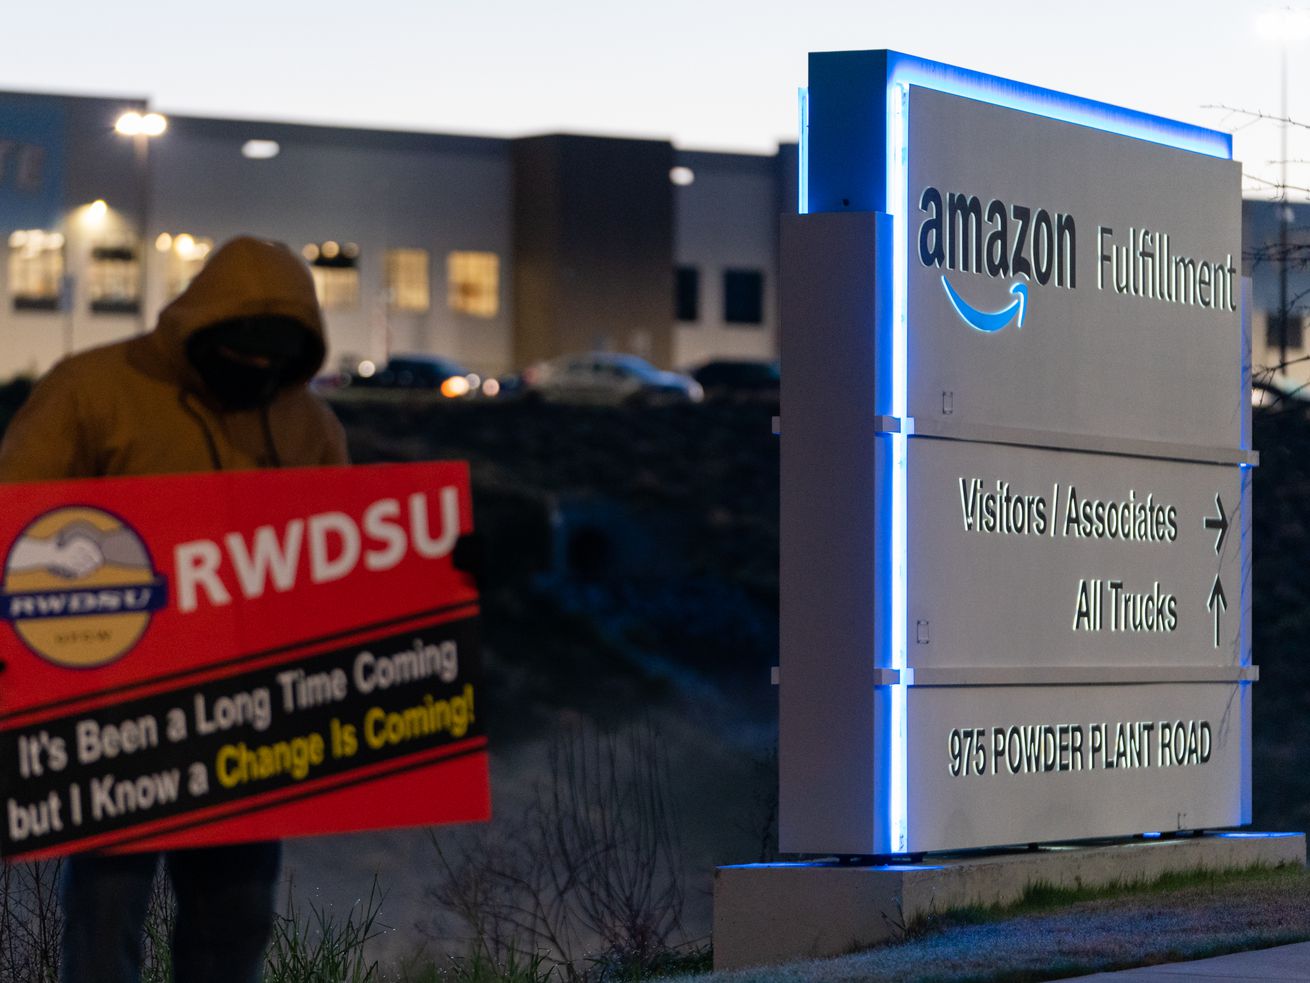 An RWDSU union representative holds a sign that reads “RWDSU: It’s been a long time coming but I know a change is coming” outside the Amazon fulfillment warehouse at the center of a unionization drive on March 29, 2021, in Bessemer, Alabama.